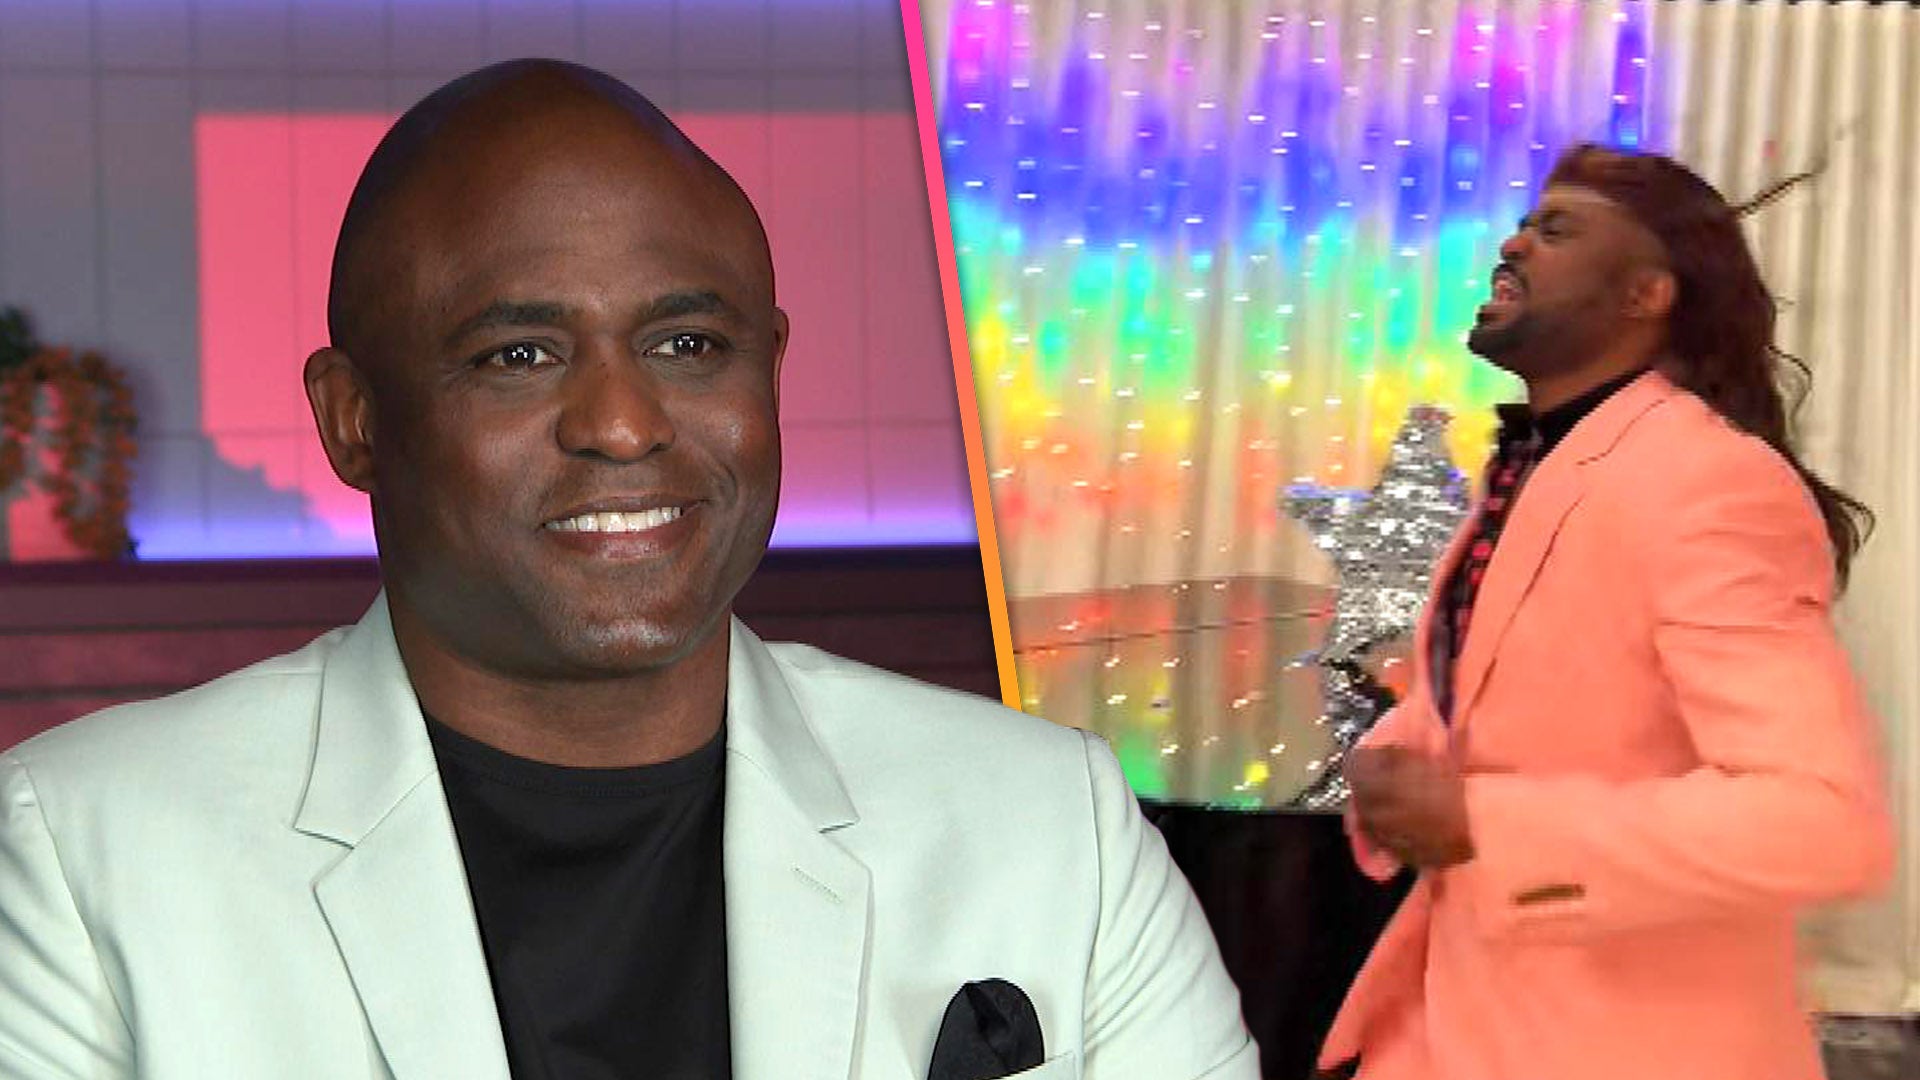 Why Wayne Brady’s Decided to Publicly Come Out as Pansexual